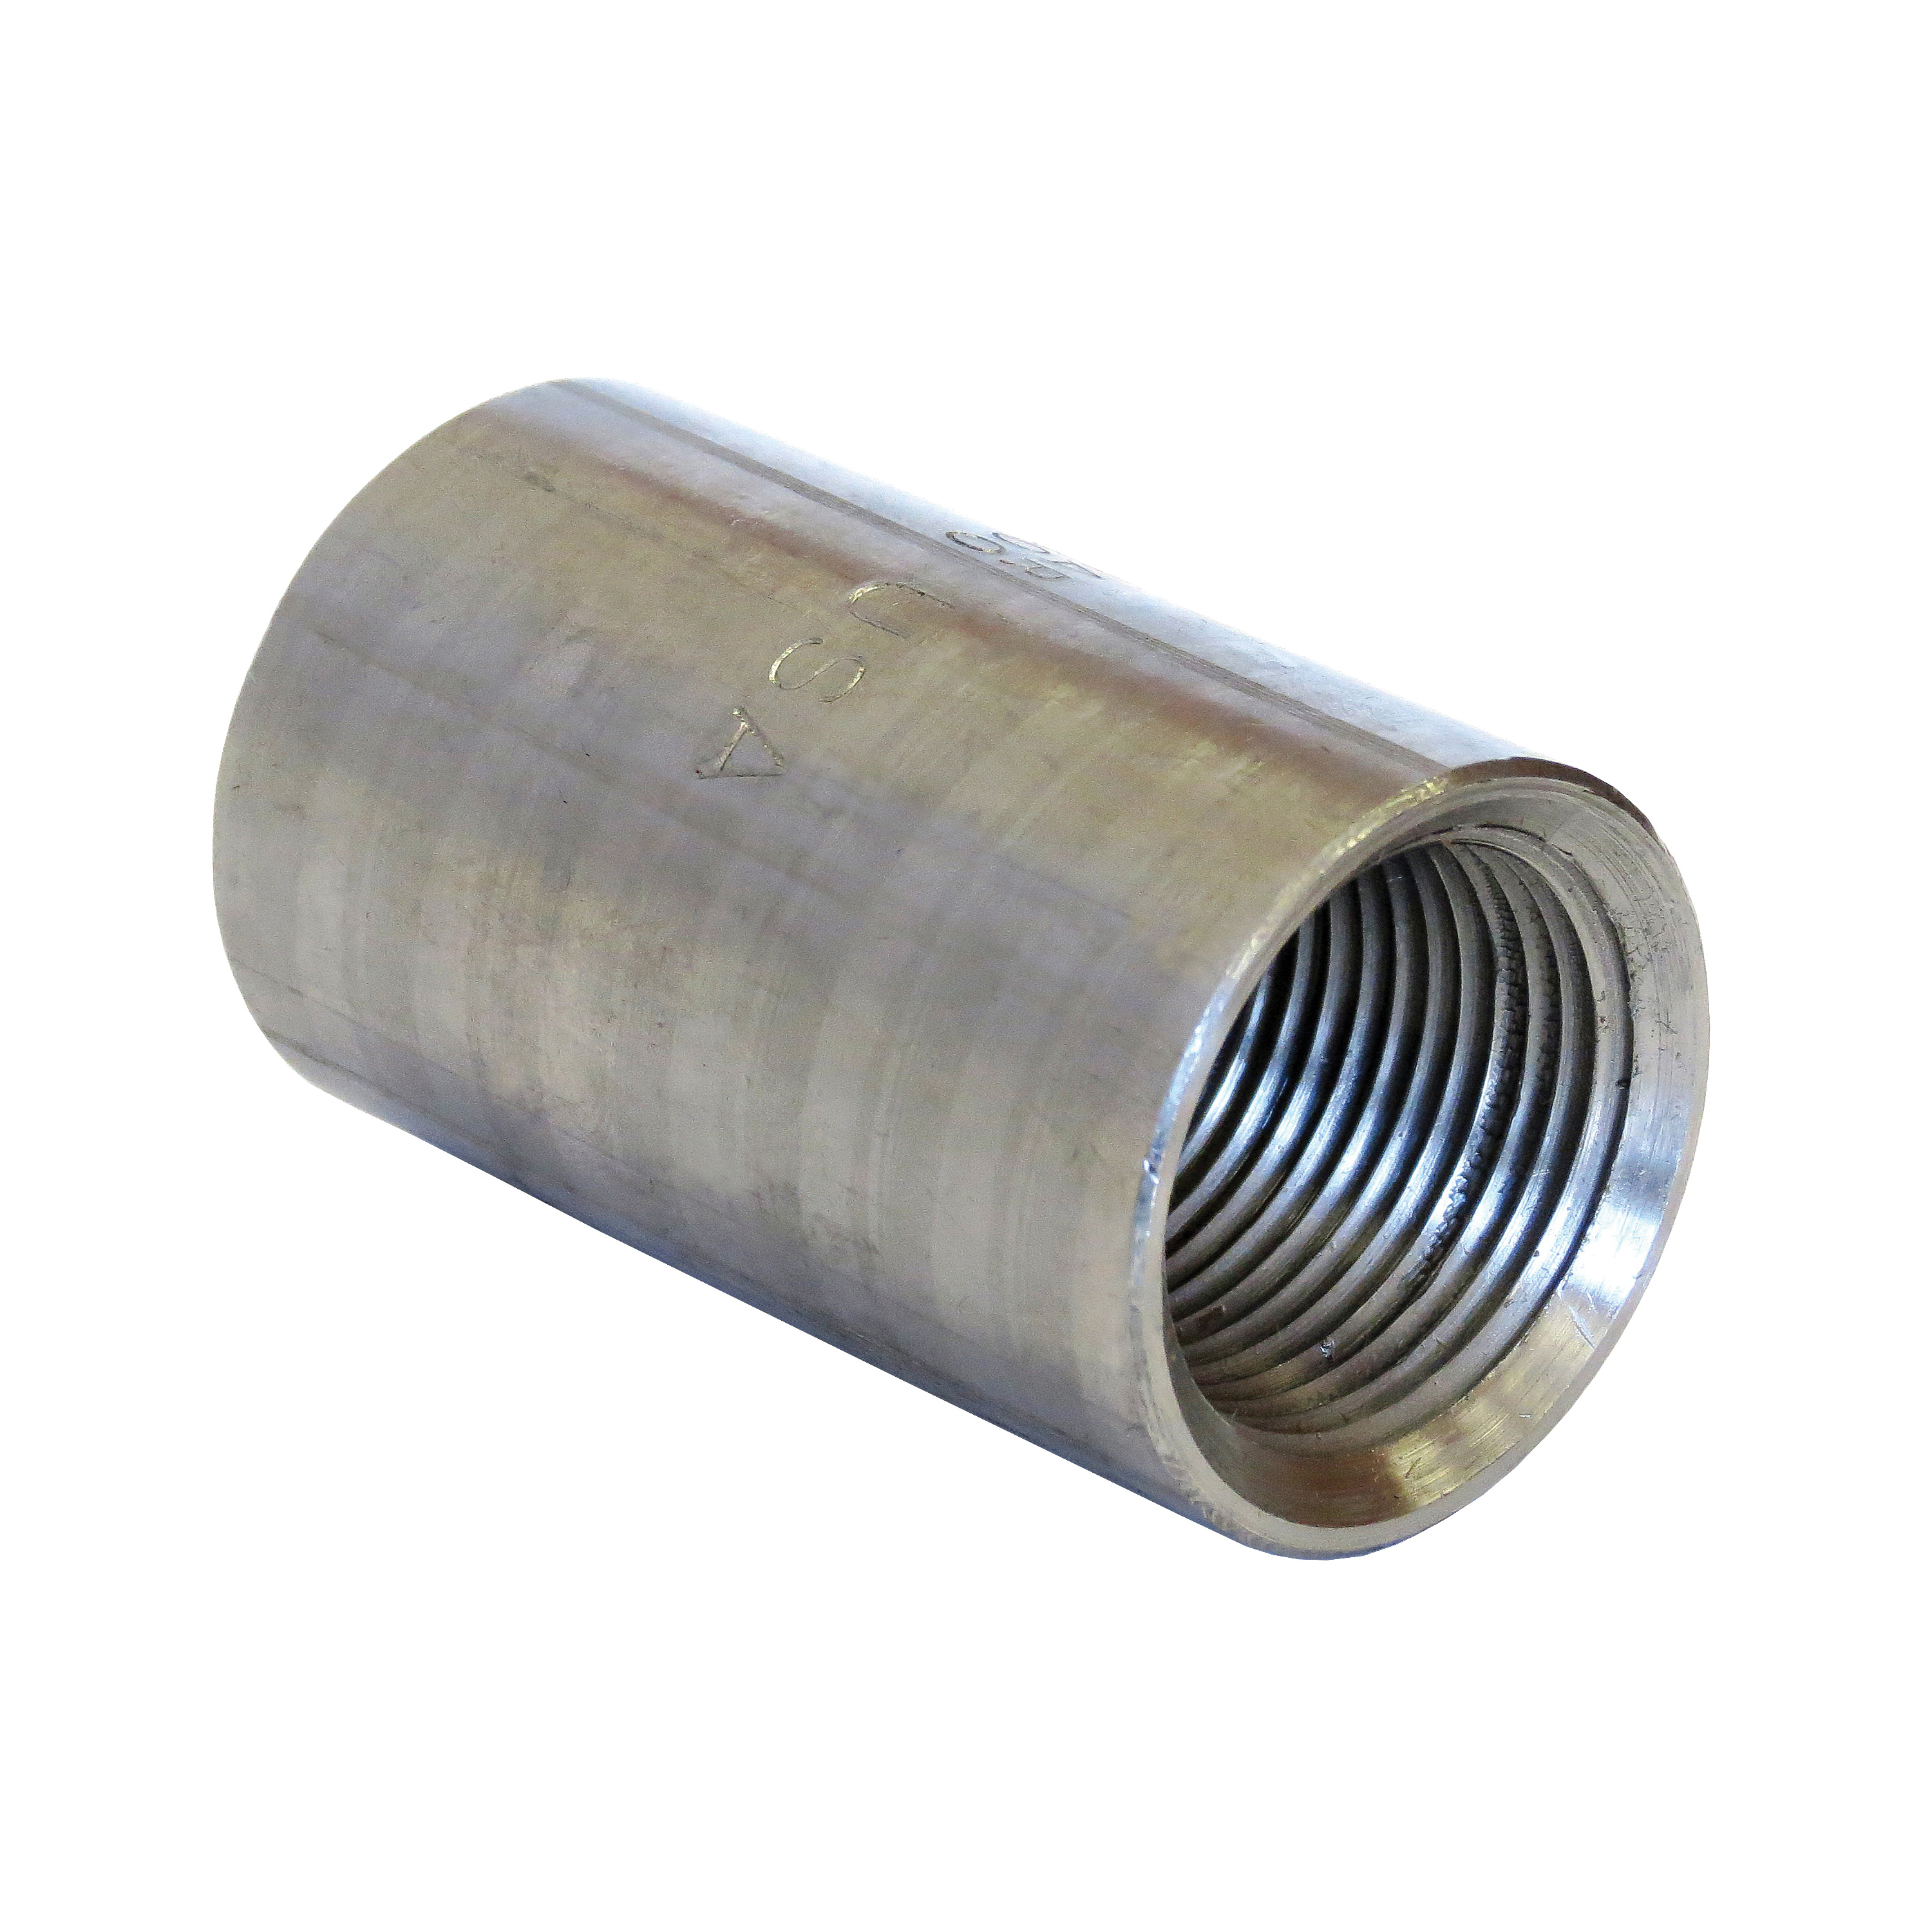 0321200453 FIG 337 Taper Tapped Non-Recessed Full Coupling, Steel, 1/8 in, SCH 80/XH and SCH XS, NPT, Galvanized, Domestic